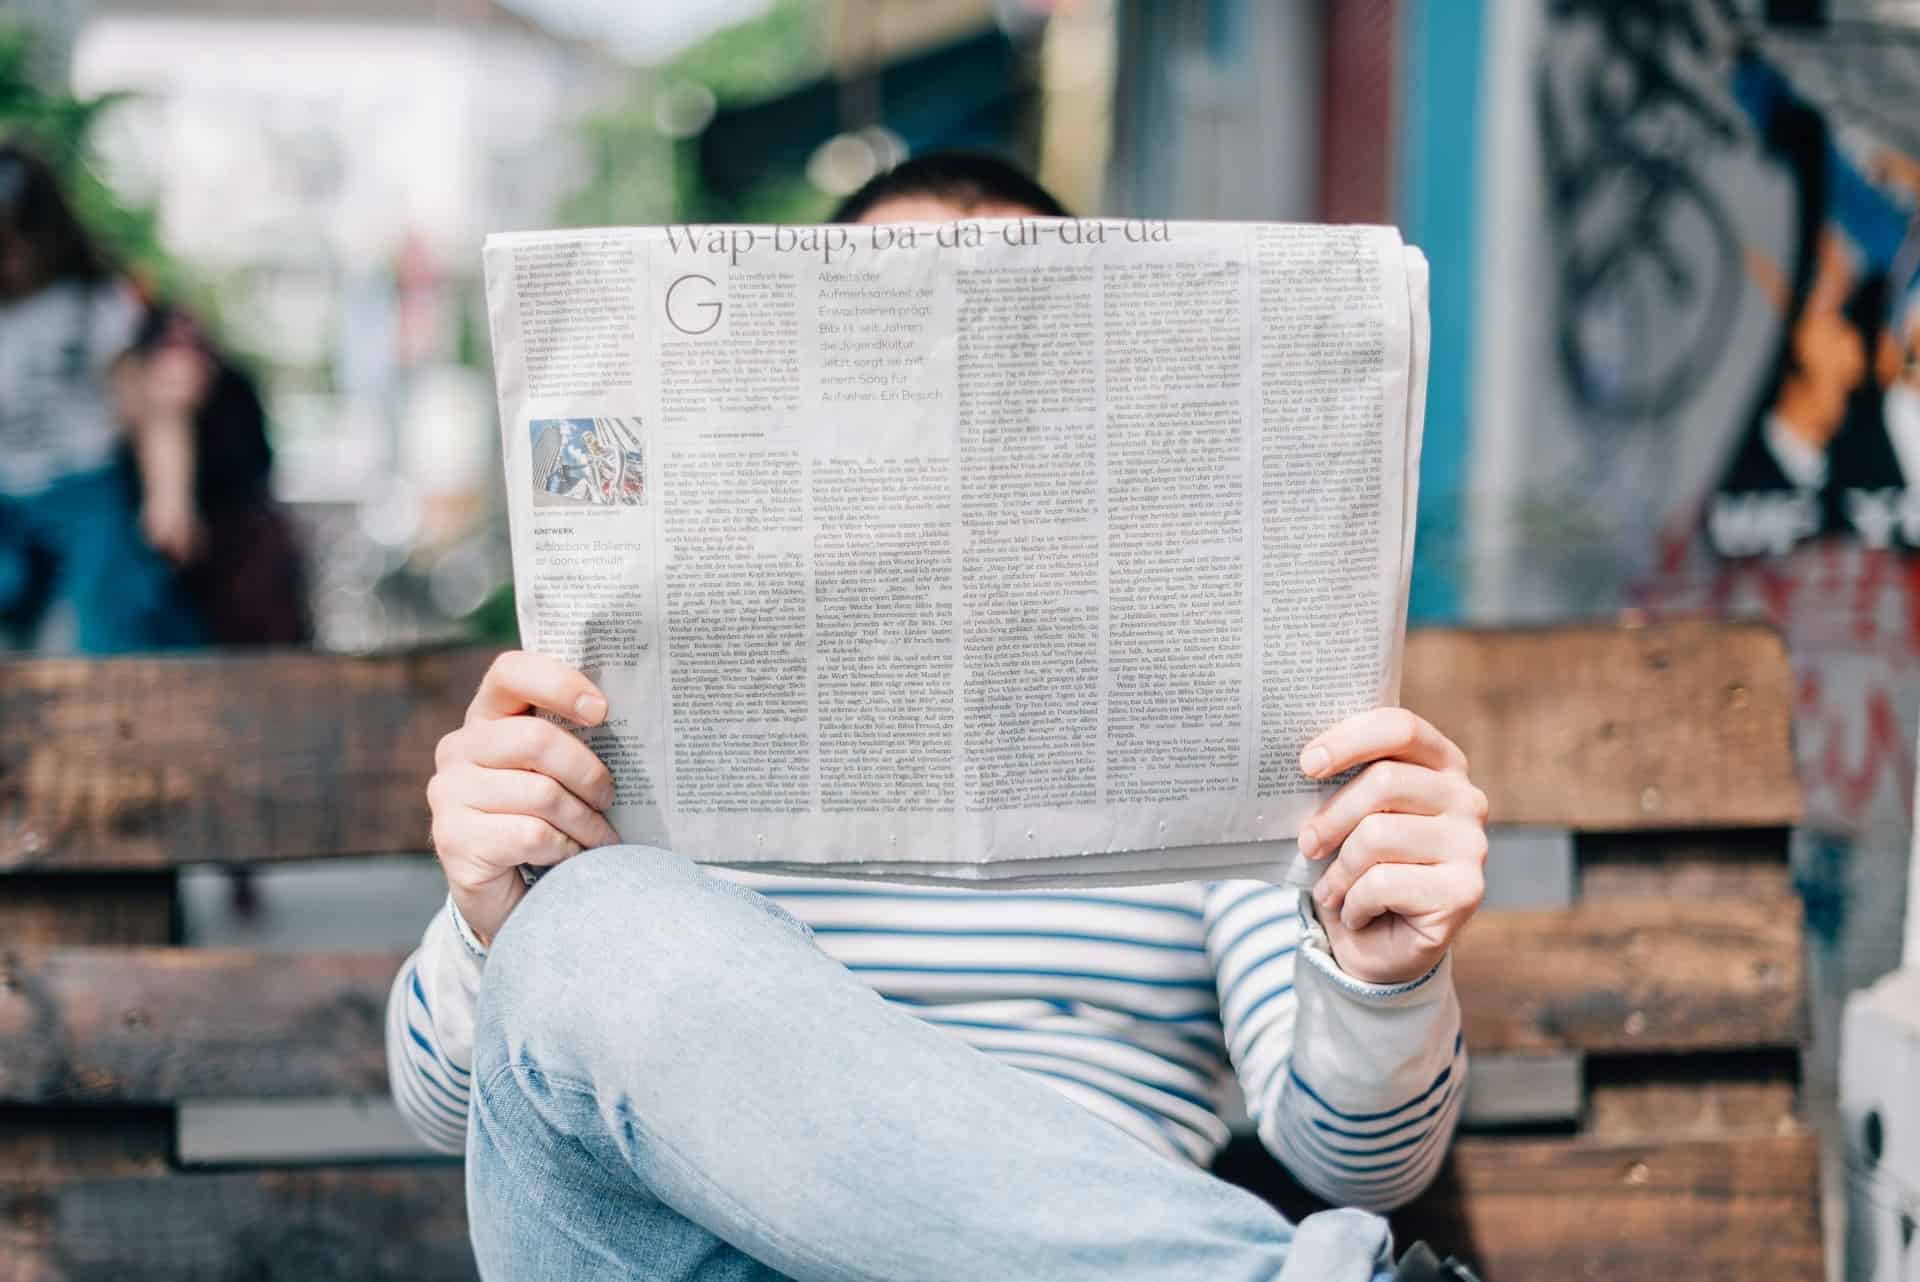 Staying informed: a person casually reads a newspaper and explores blogging tips, keeping up-to-date with world events on a relaxed day out in the city.